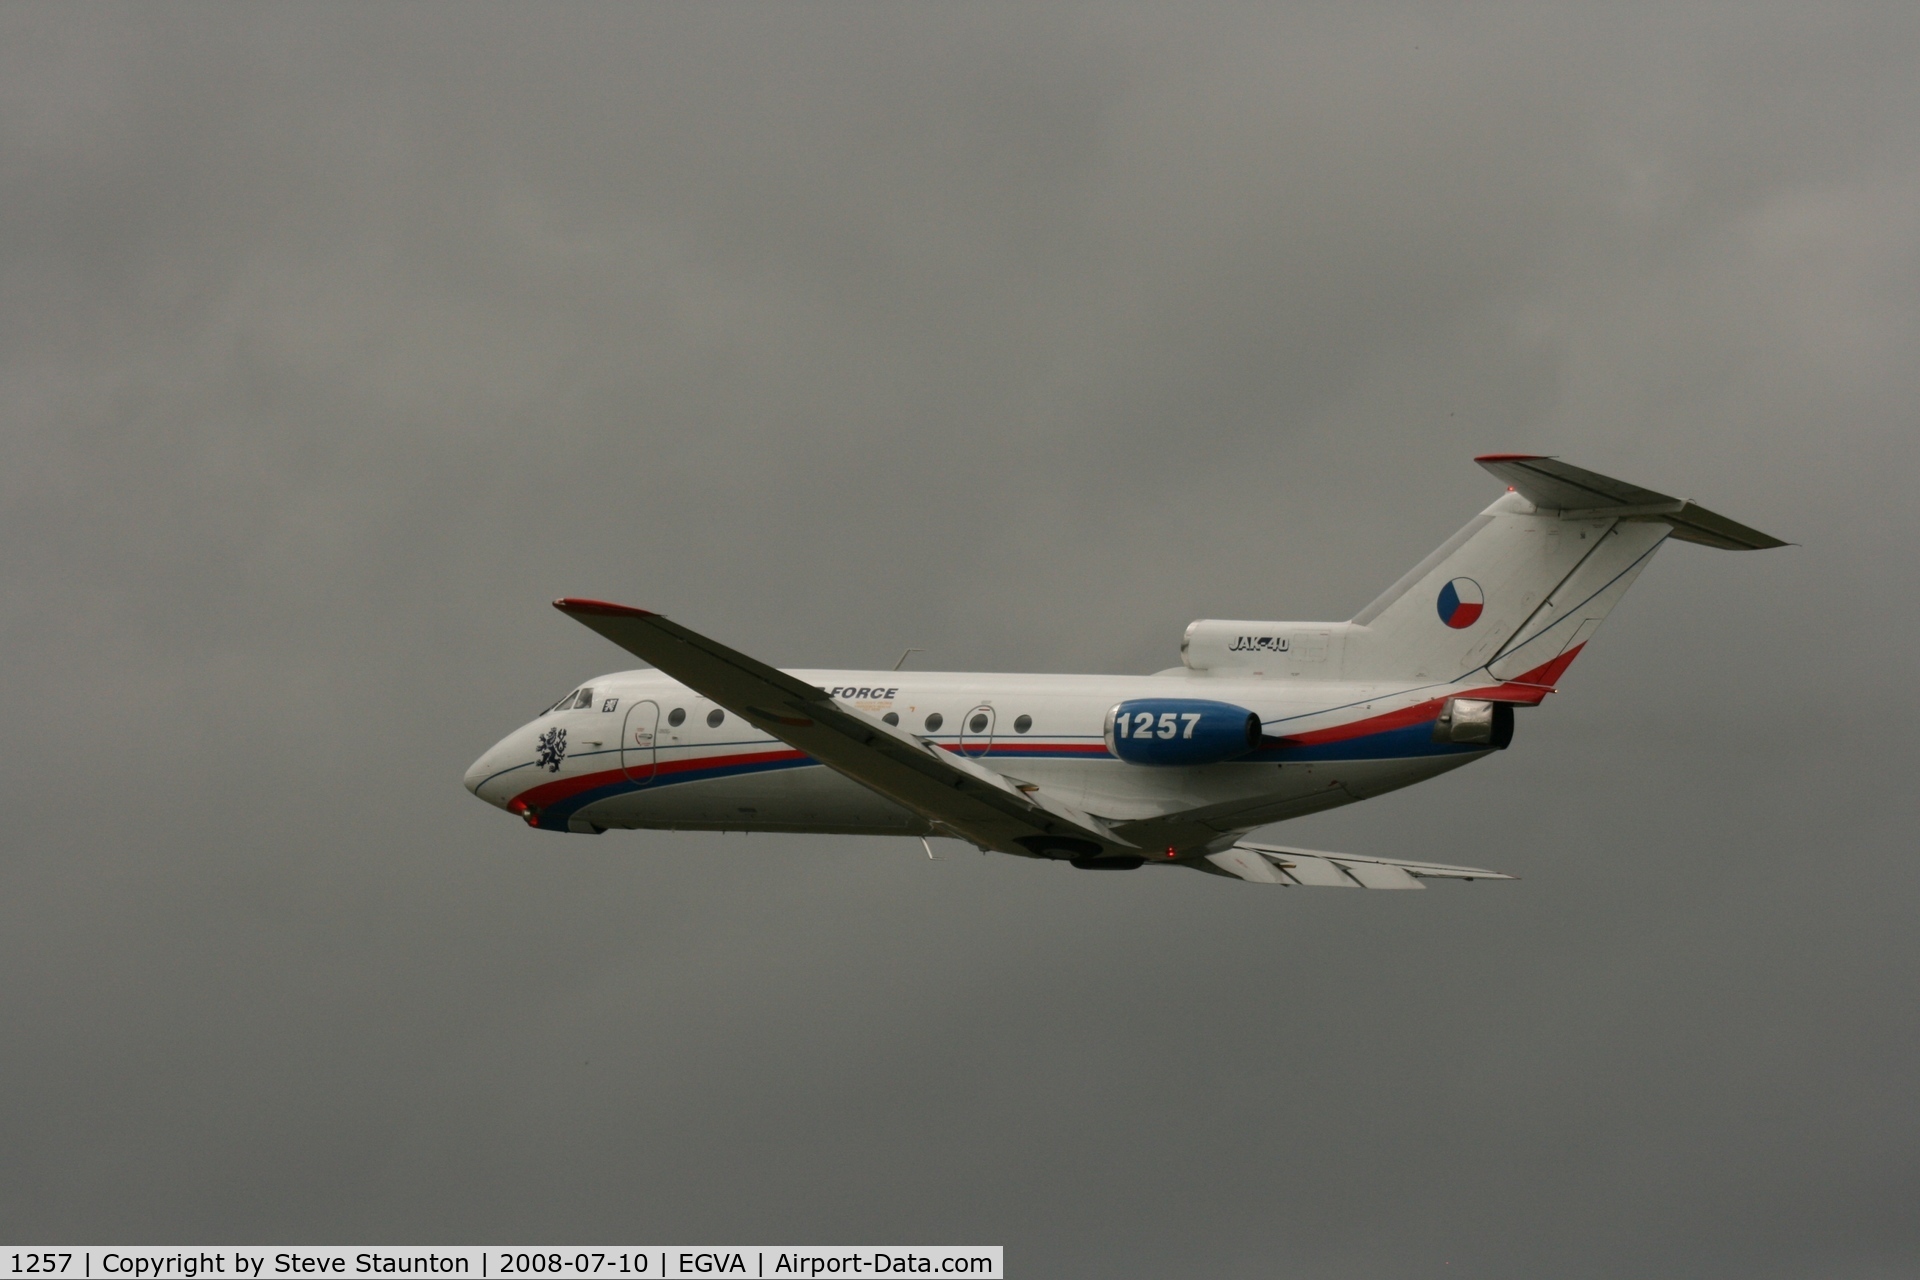 1257, 1978 Yakovlev Yak-40K C/N 9821257, Taken at the Royal International Air Tattoo 2008 during arrivals and departures (show days cancelled due to bad weather)